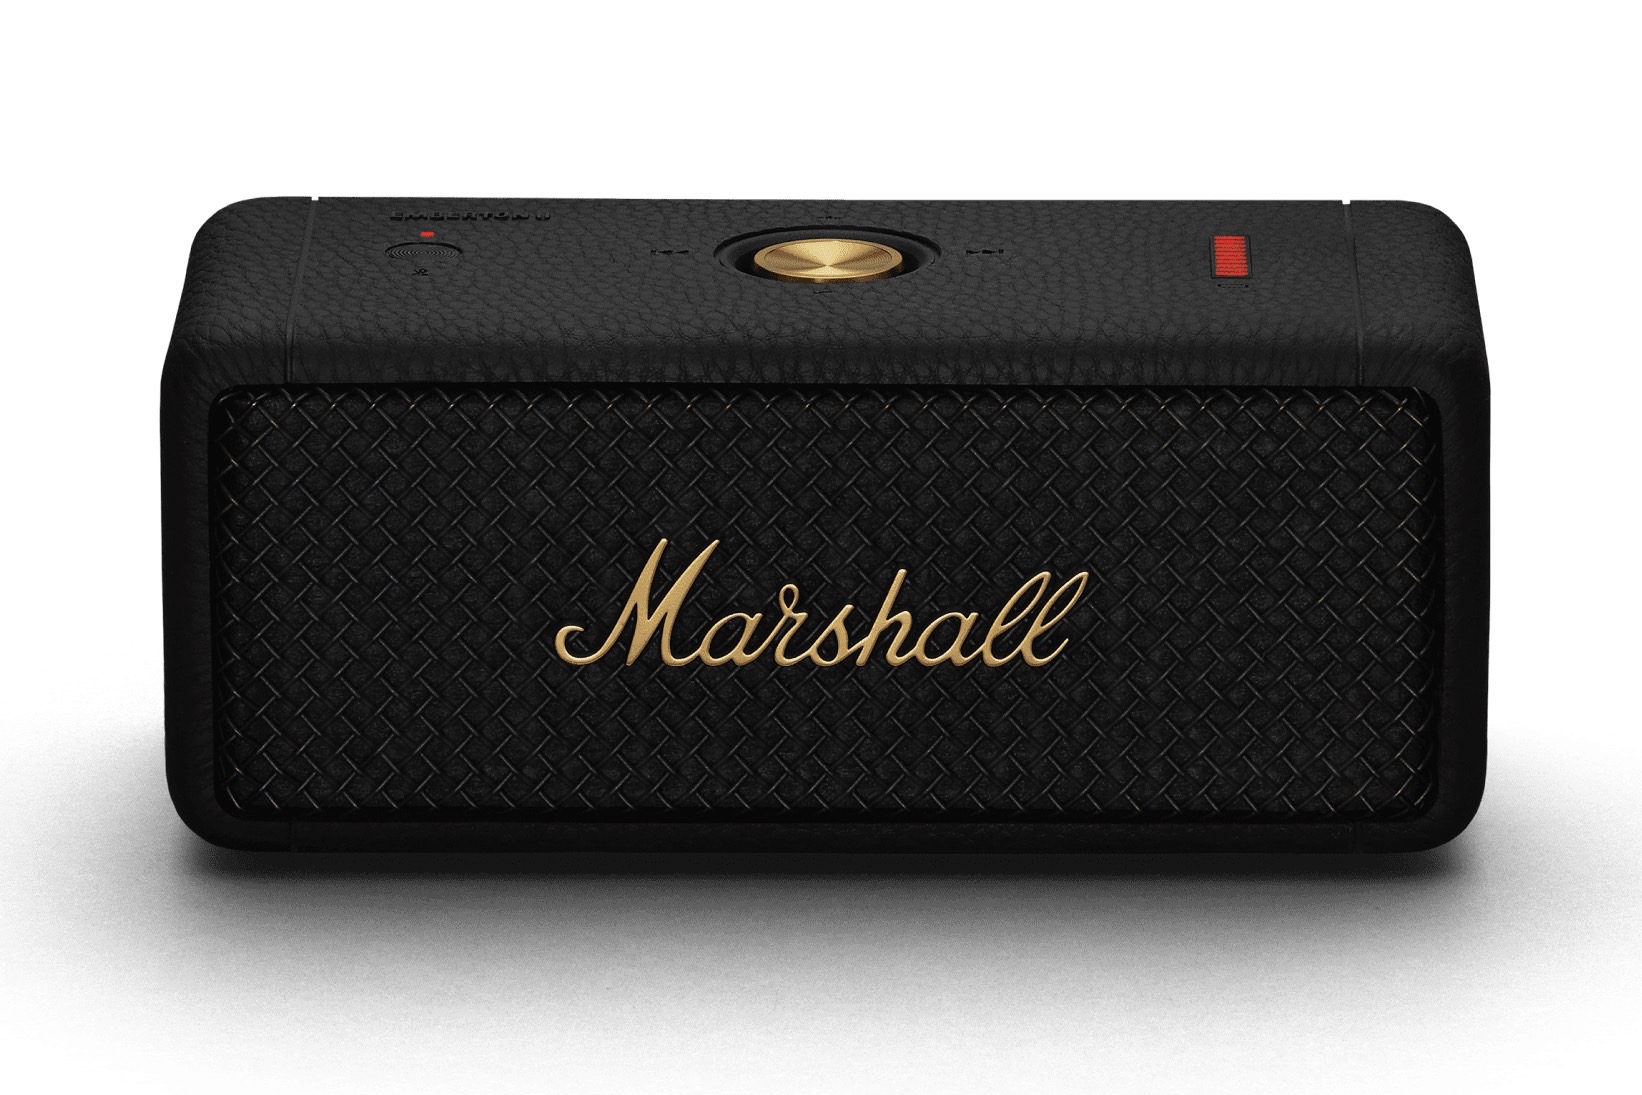 Marshall unveils Willen and Emberton II speakers with Stack Mode feature -   News